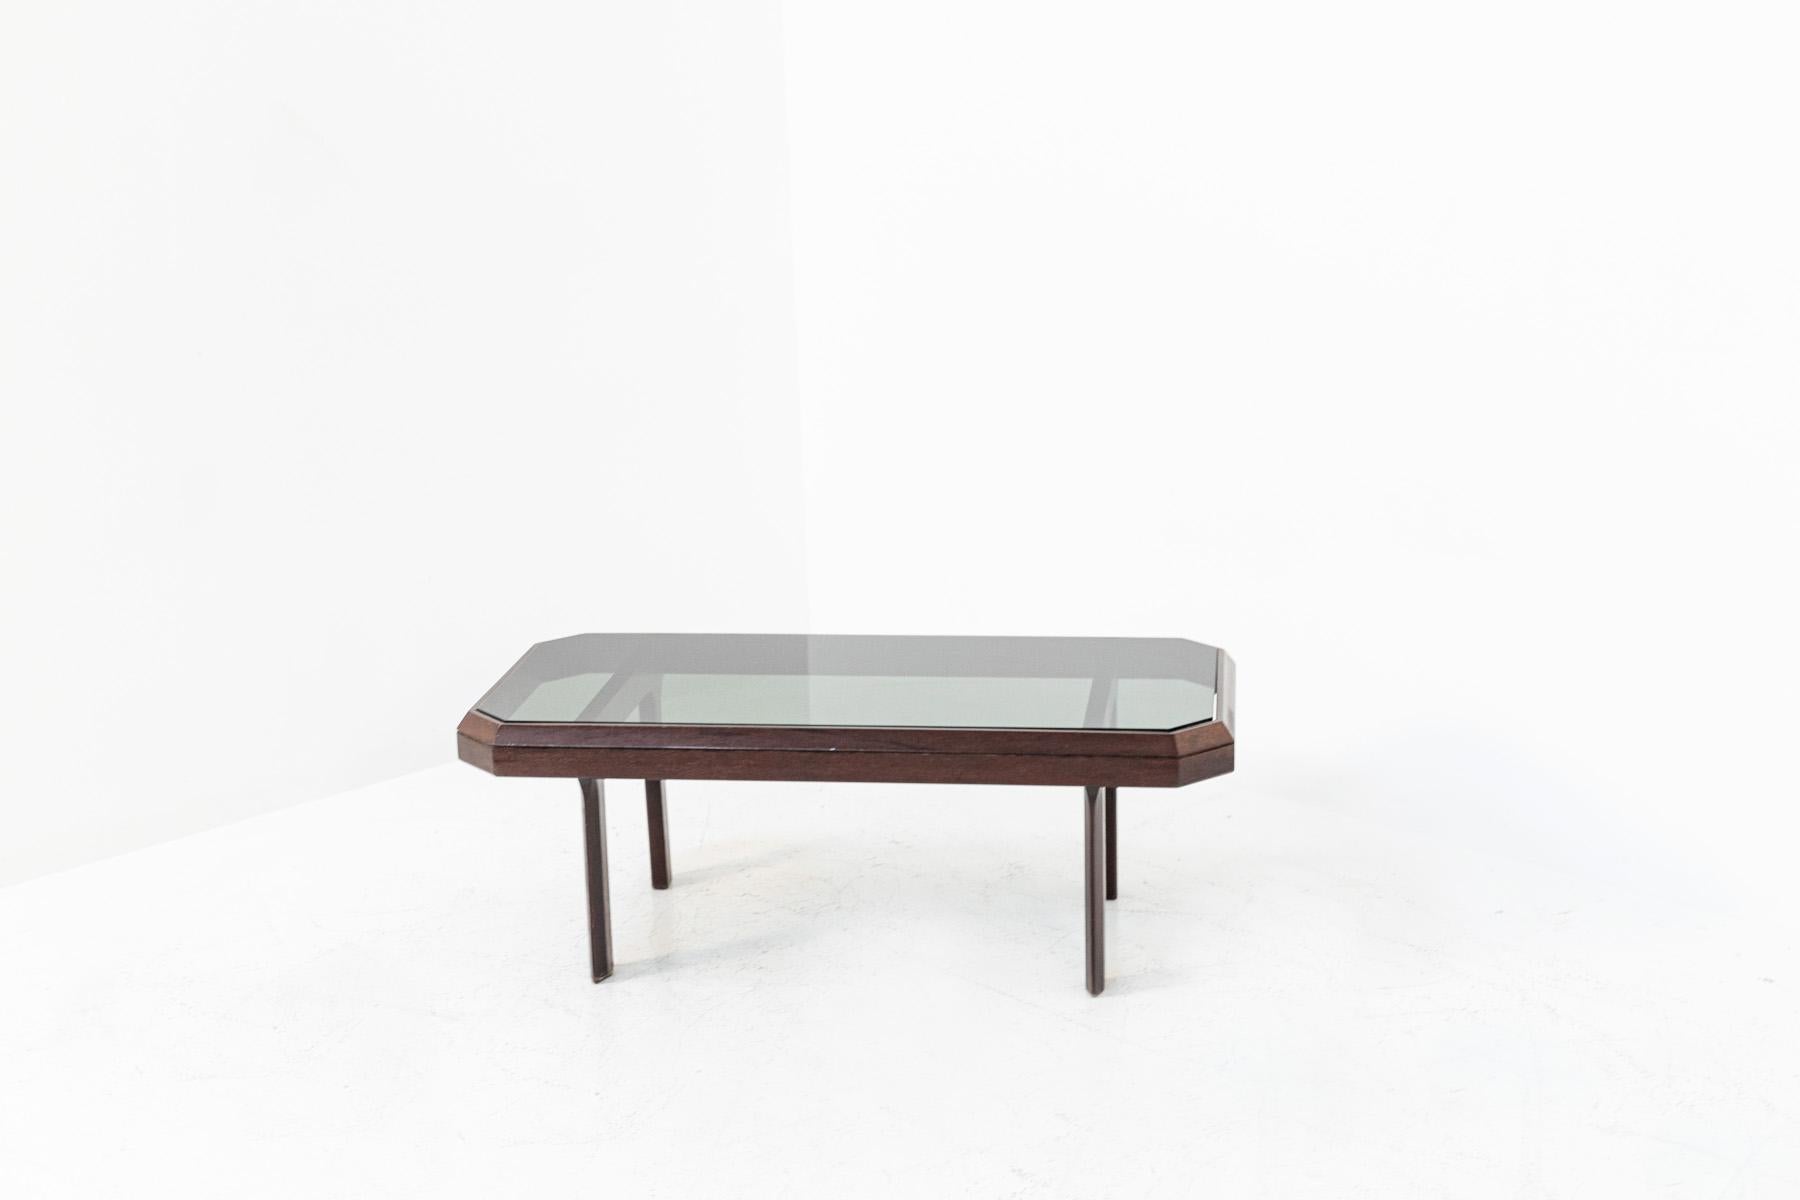 Italian coffee table from the 70's in dark walnut wood. The coffee table features beautiful clean lines. Its table top has right angles in a hexagonal shape. Its table top is made of smoked glass also in hexagonal shape. Its legs are also in line